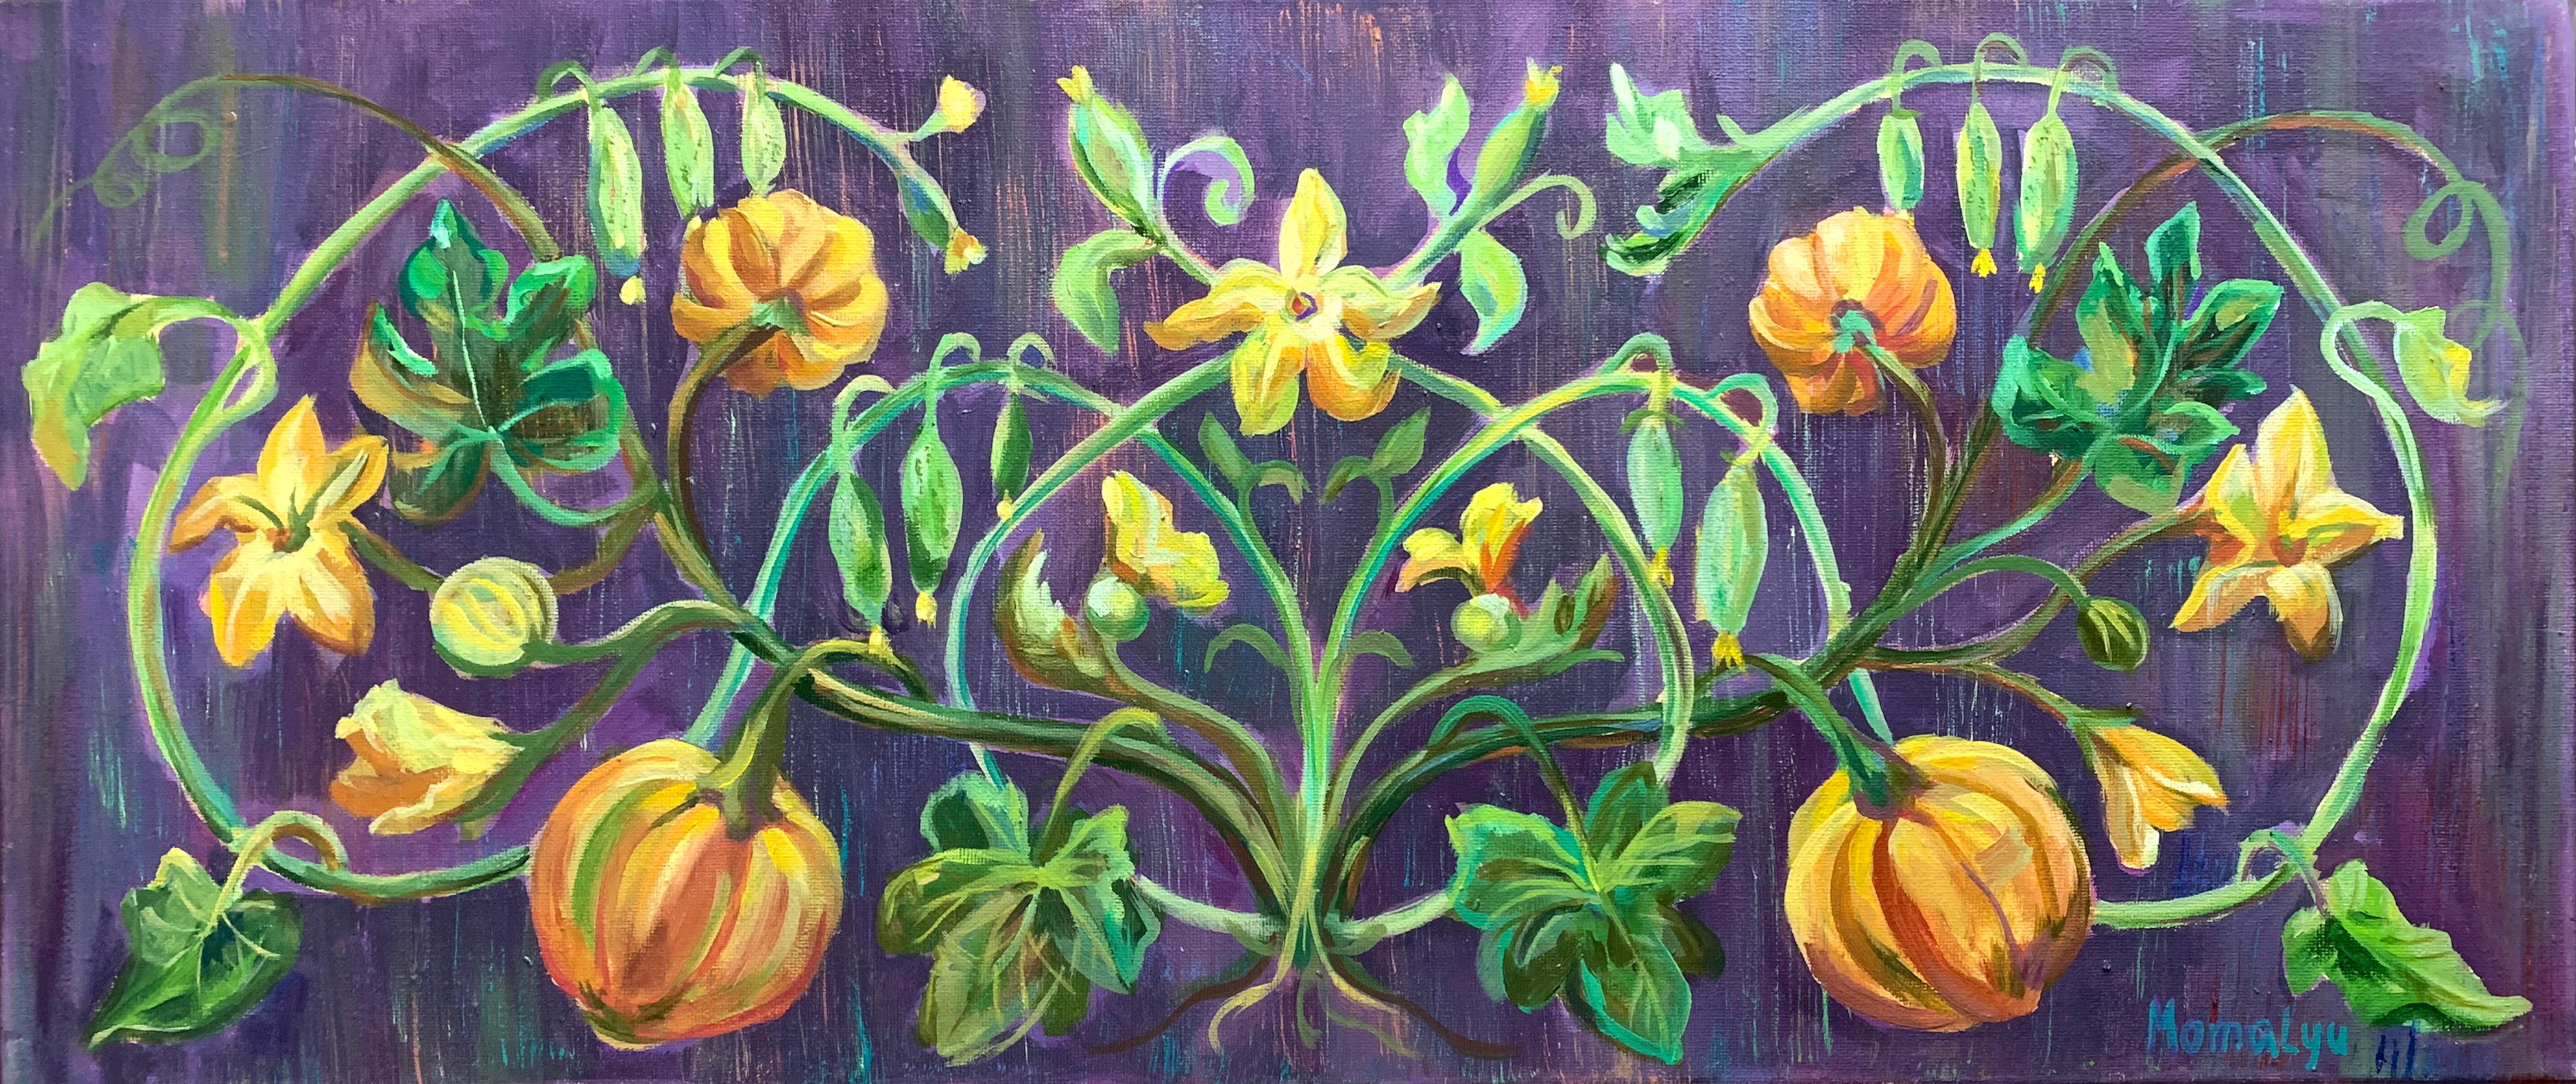 Grace of the interweaving of natural in vintage style. Oil paint on canvas. 